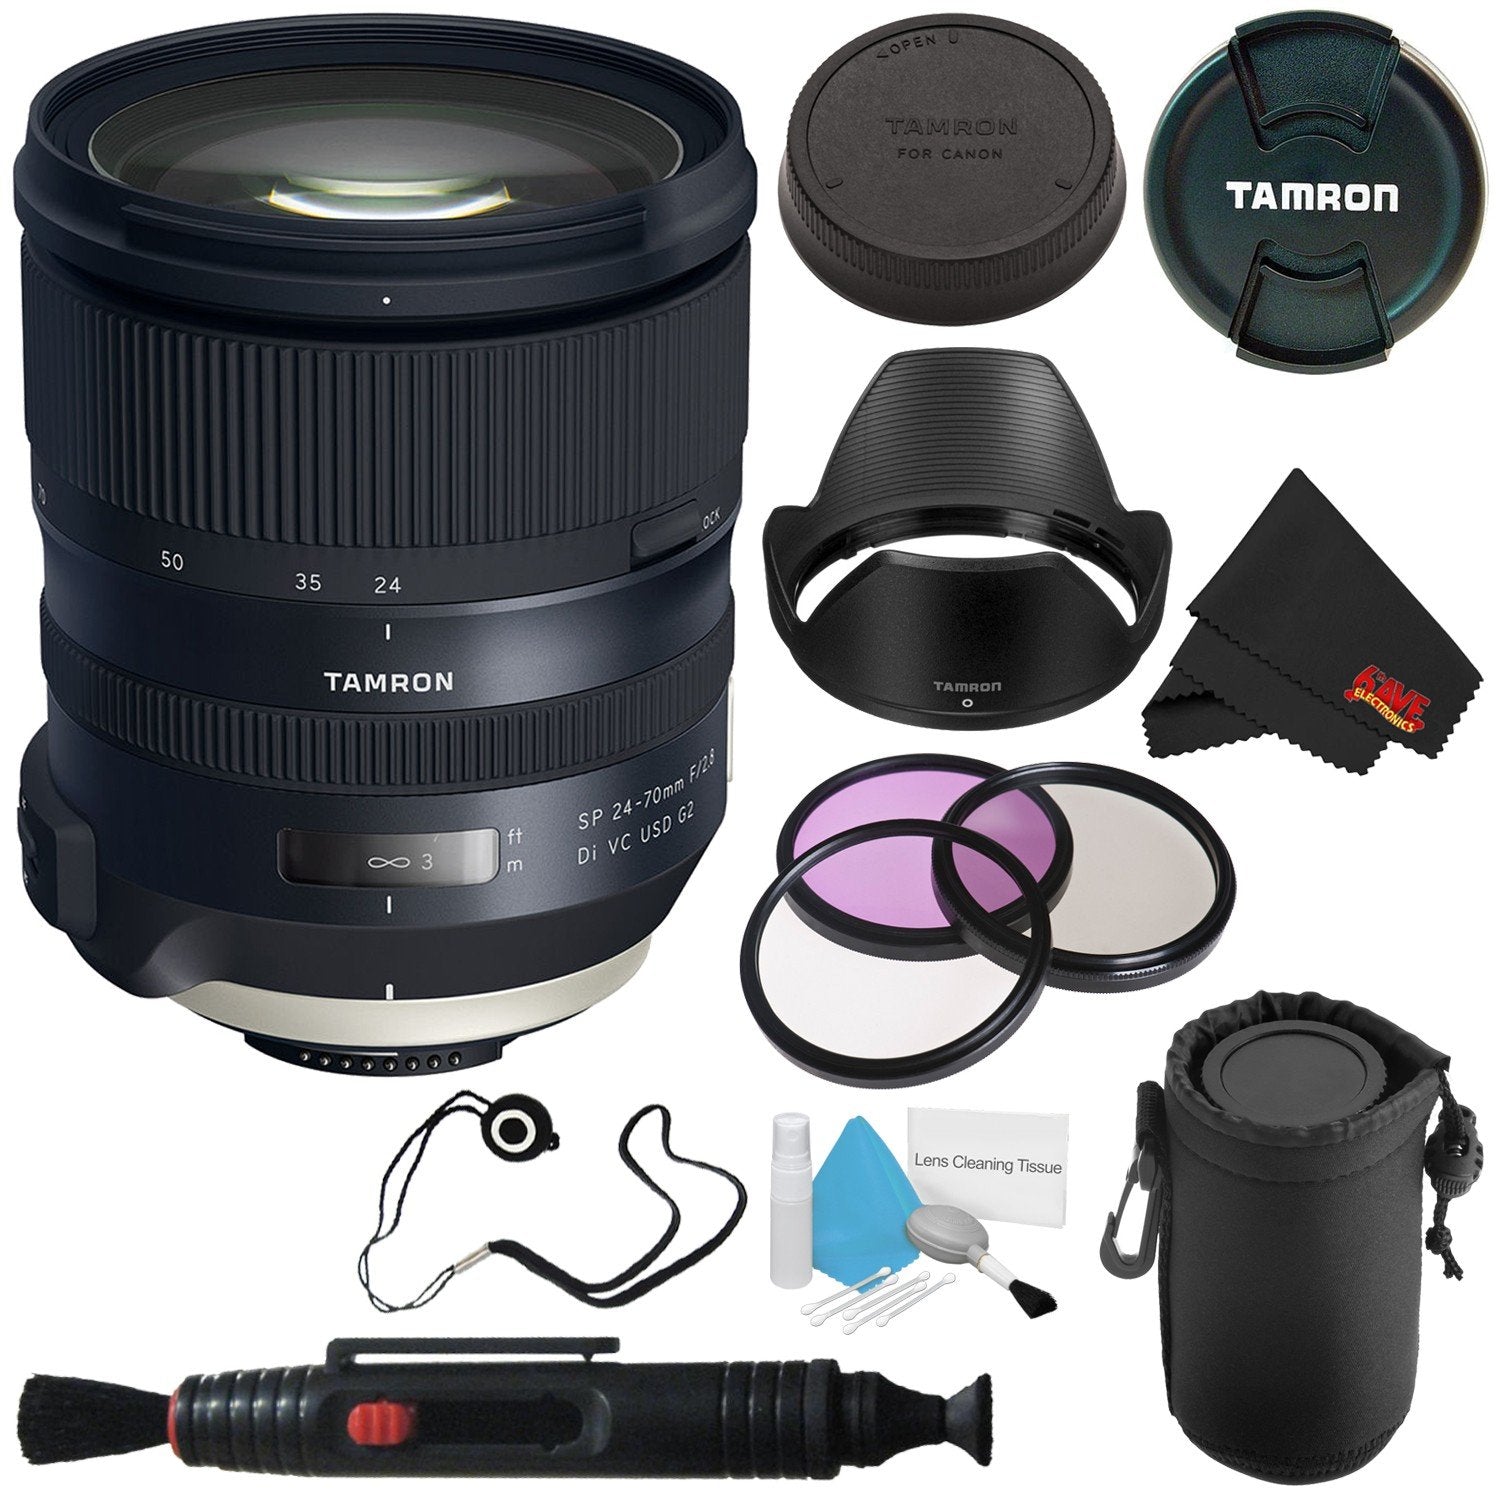 6Ave Tamron SP 24-70mm f/2.8 Di VC USD G2 Lens for Nikon F (International Model) + 82mm 3 Piece Filter Kit + Deluxe Lens